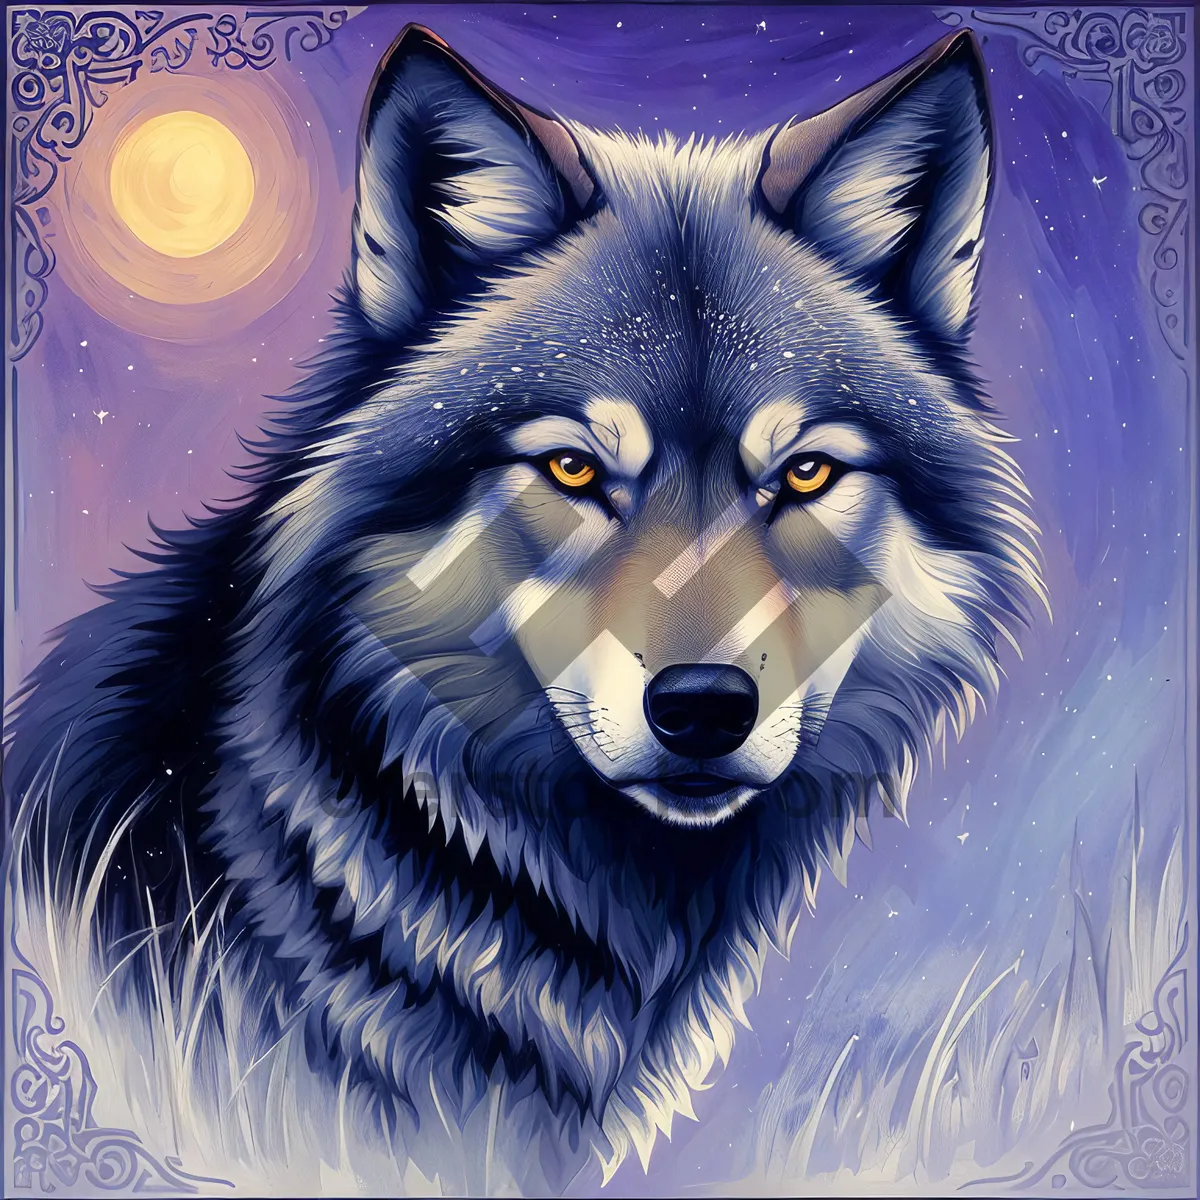 Picture of Fierce Timber Wolf: Majestic Canine with Piercing Eyes